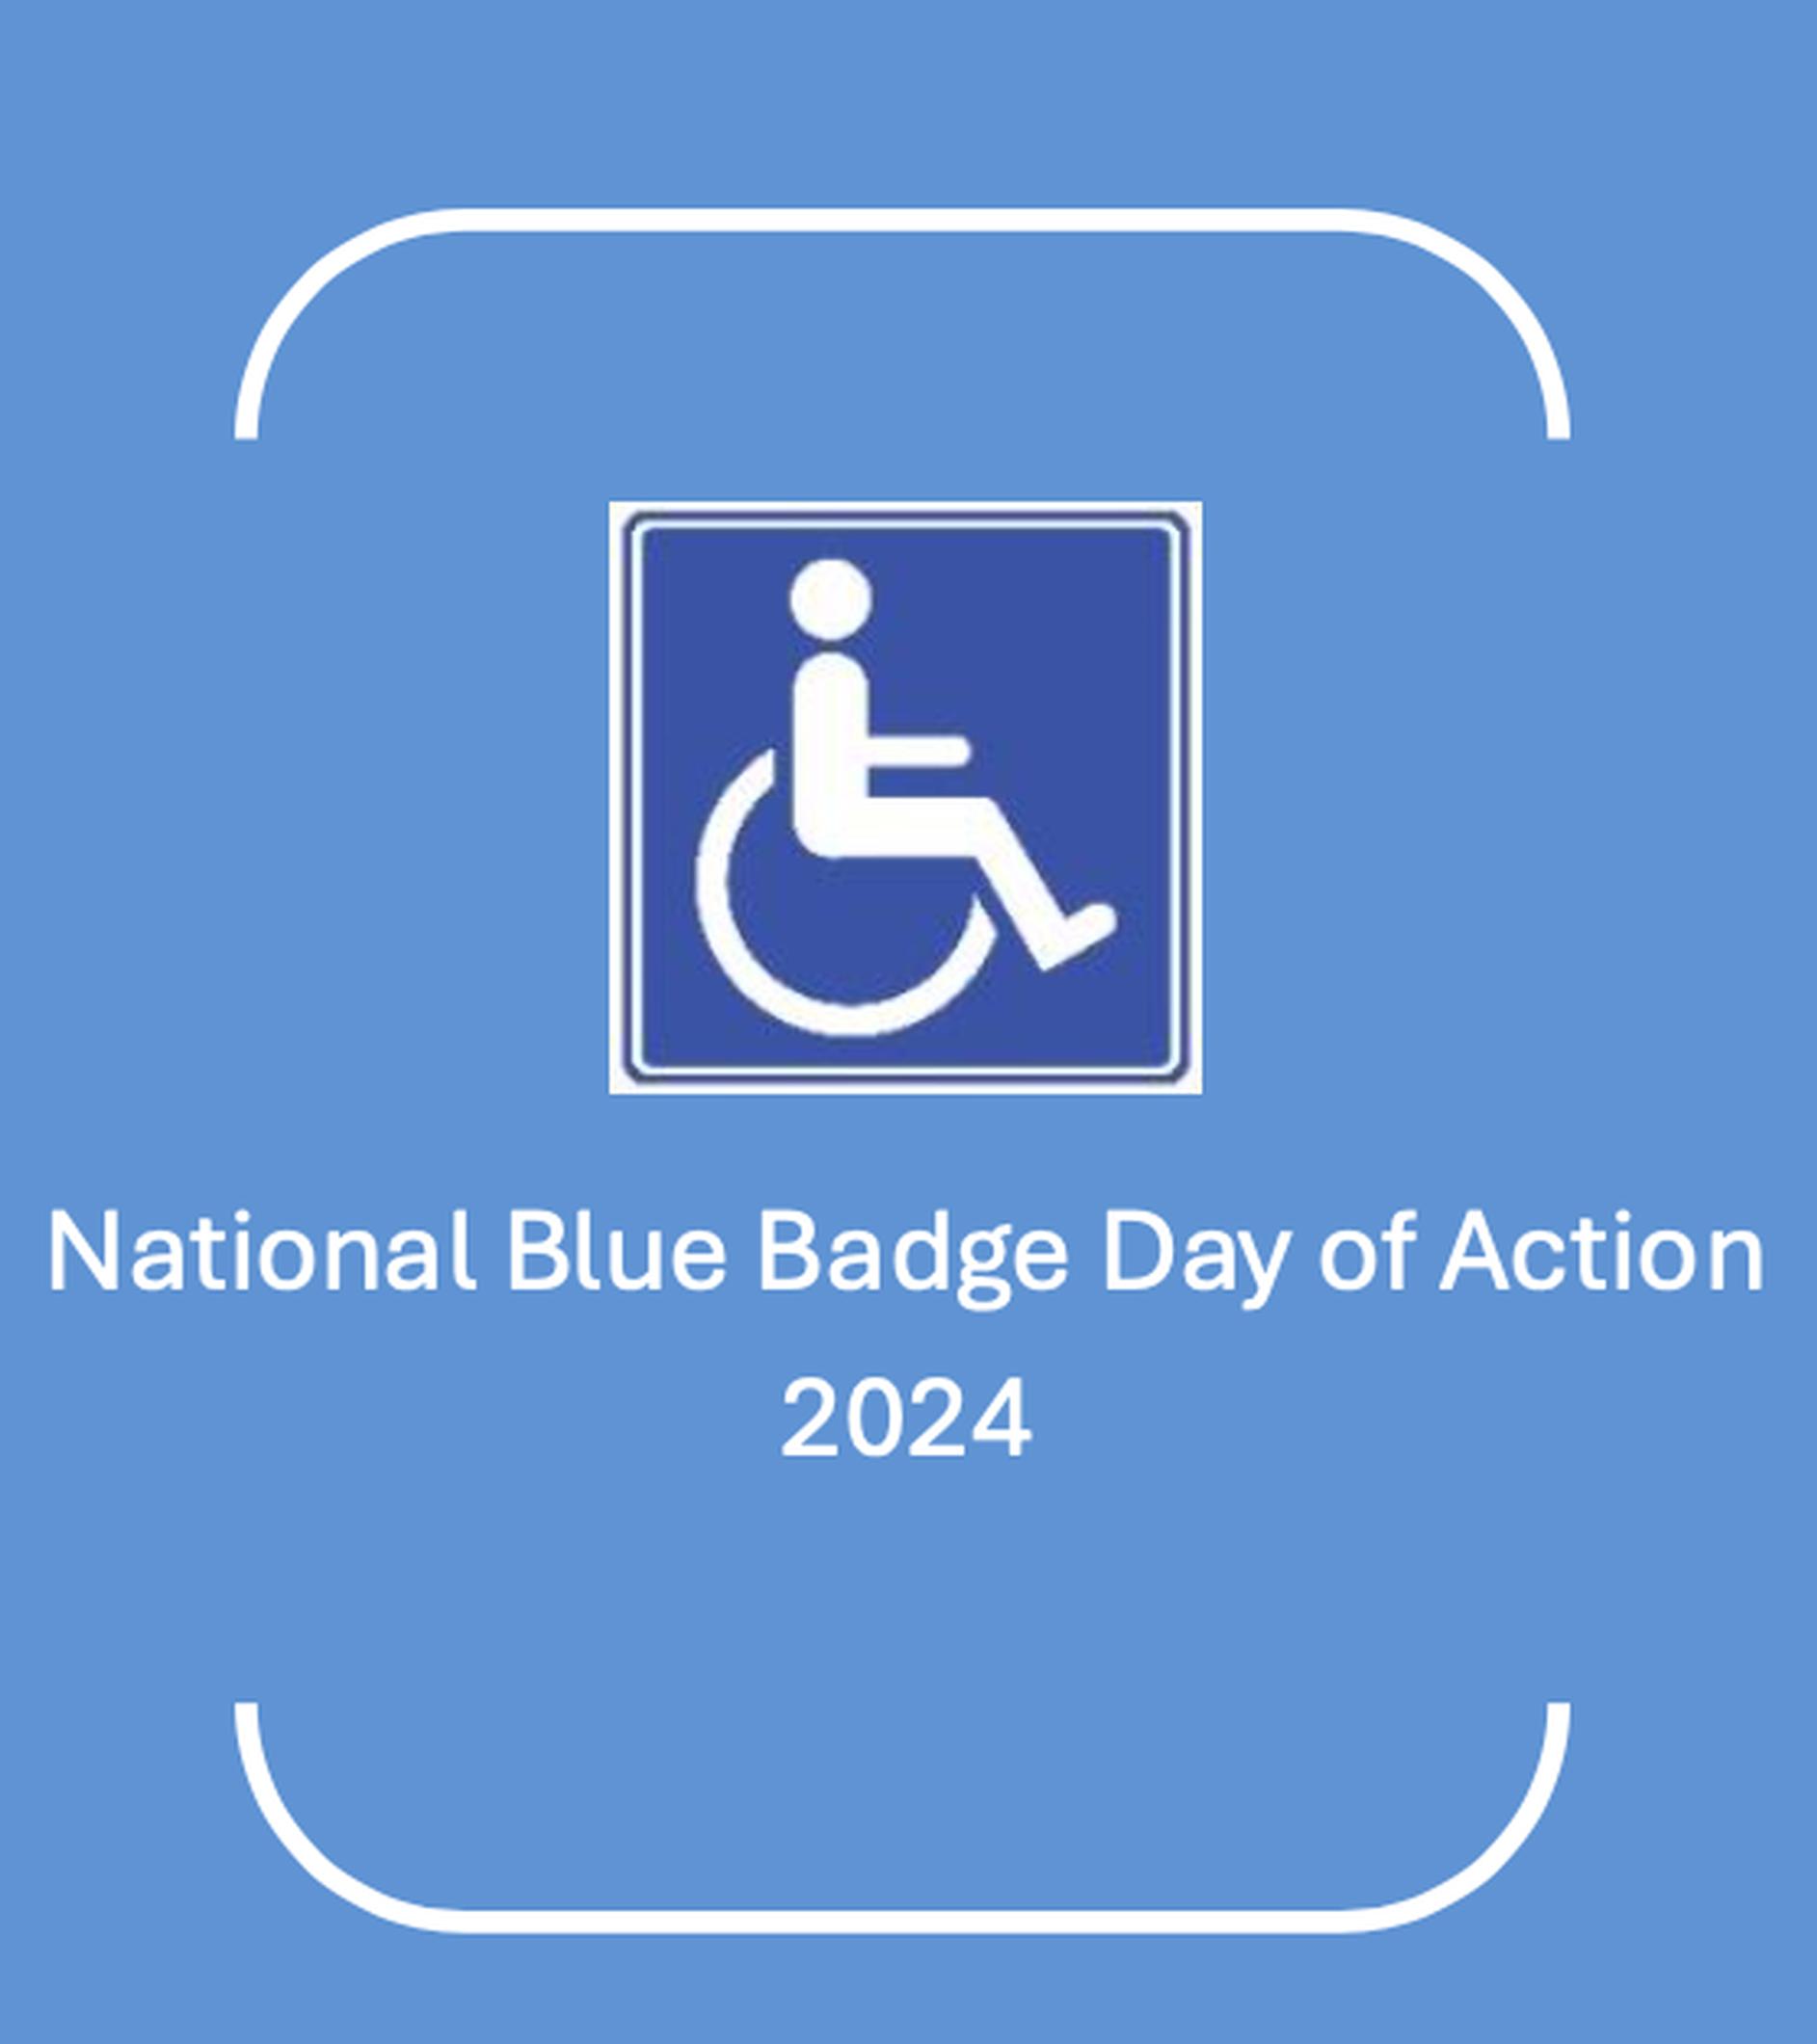 Taking a stand against Blue Badge fraud